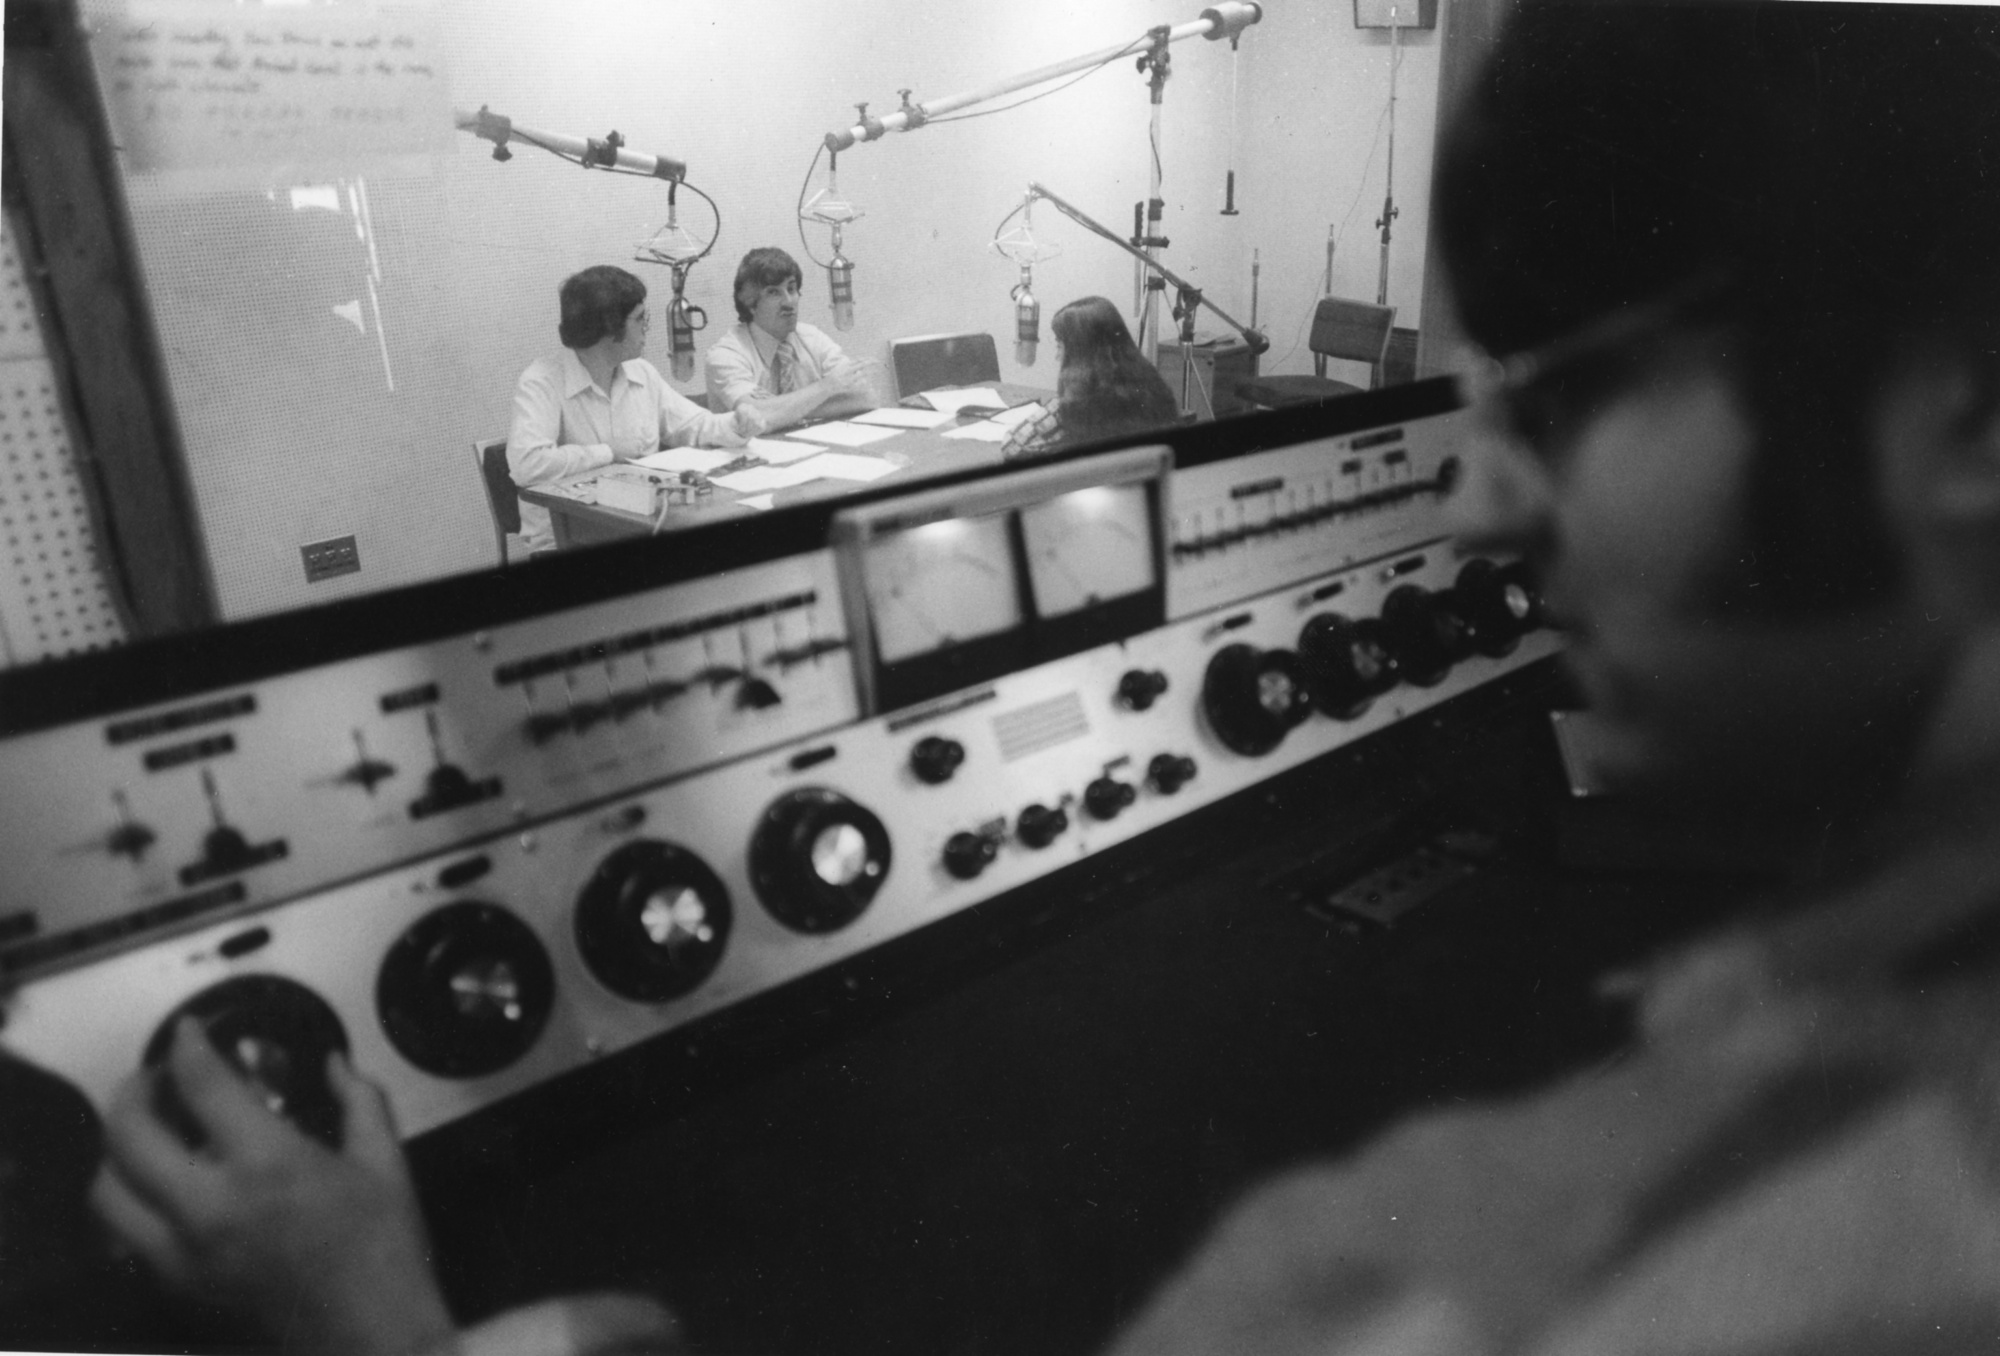 1975 A View from Production - Producing a show for future broadcast